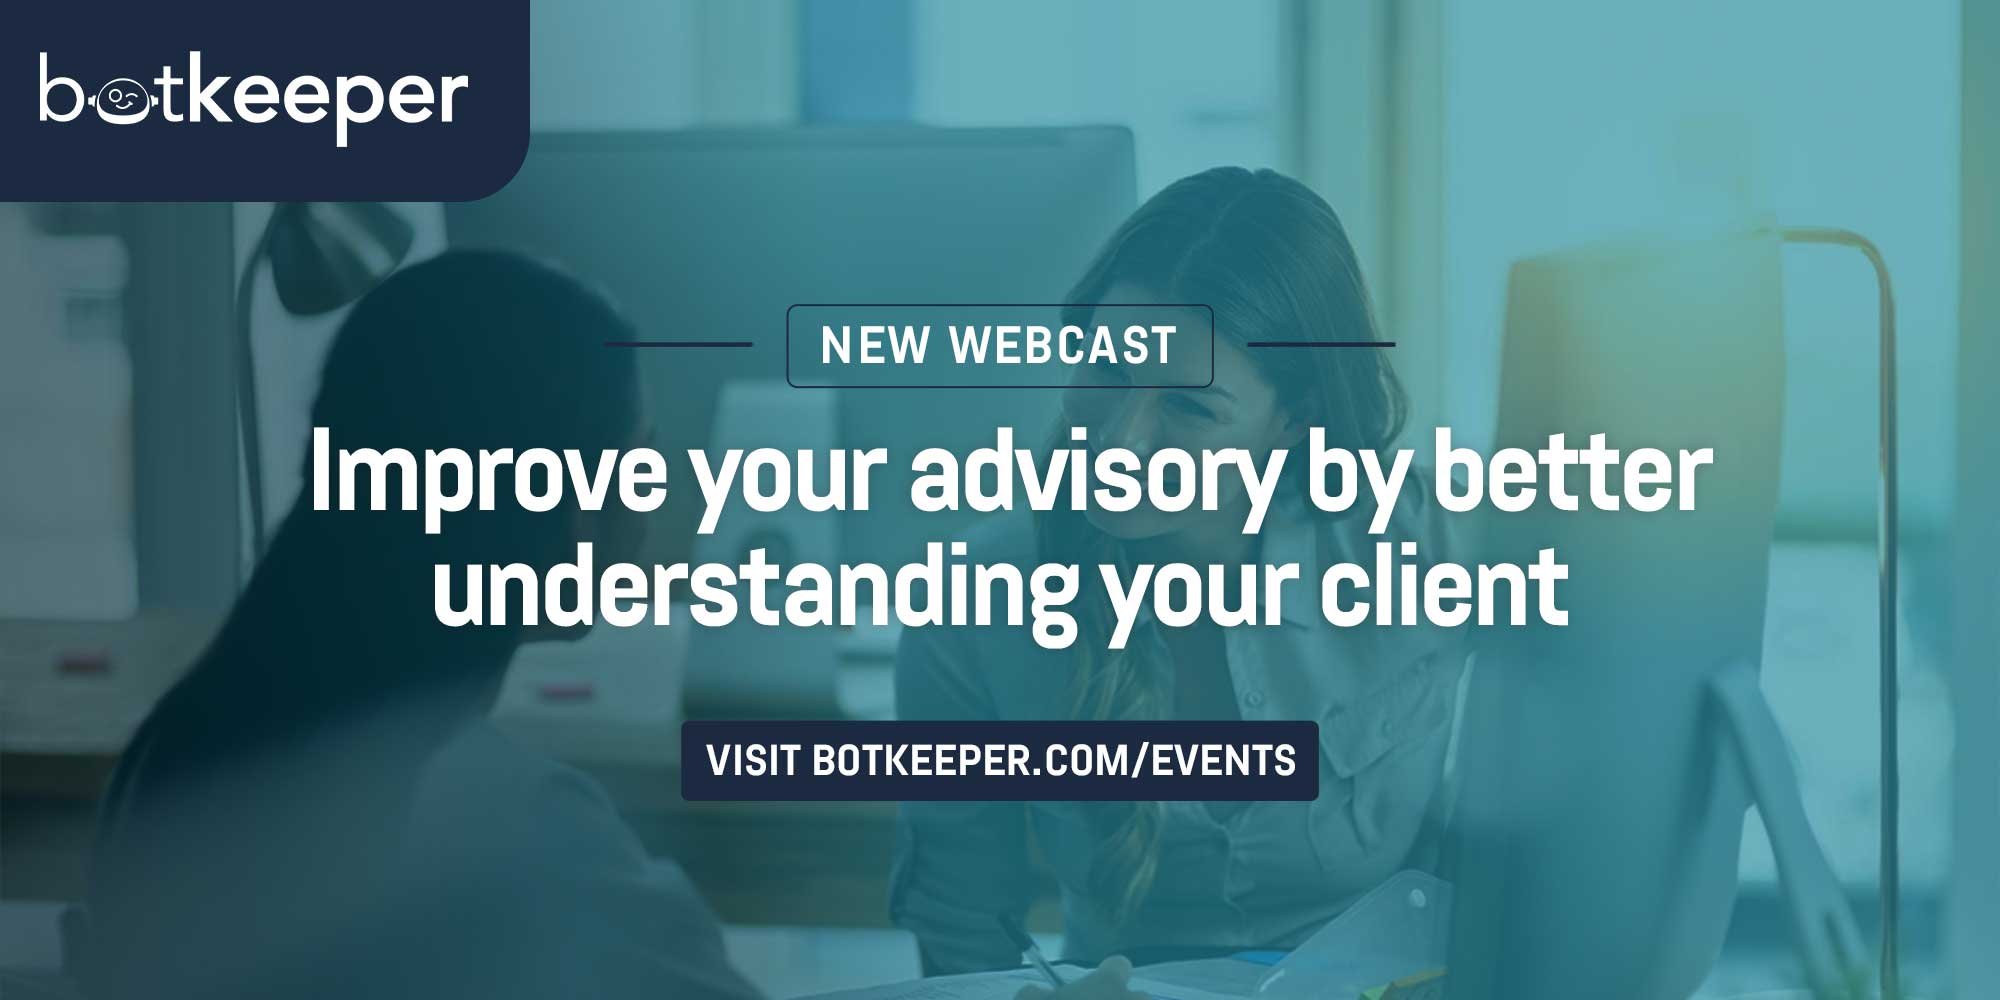 Improve-your-advisory-by-better-understanding-your-client